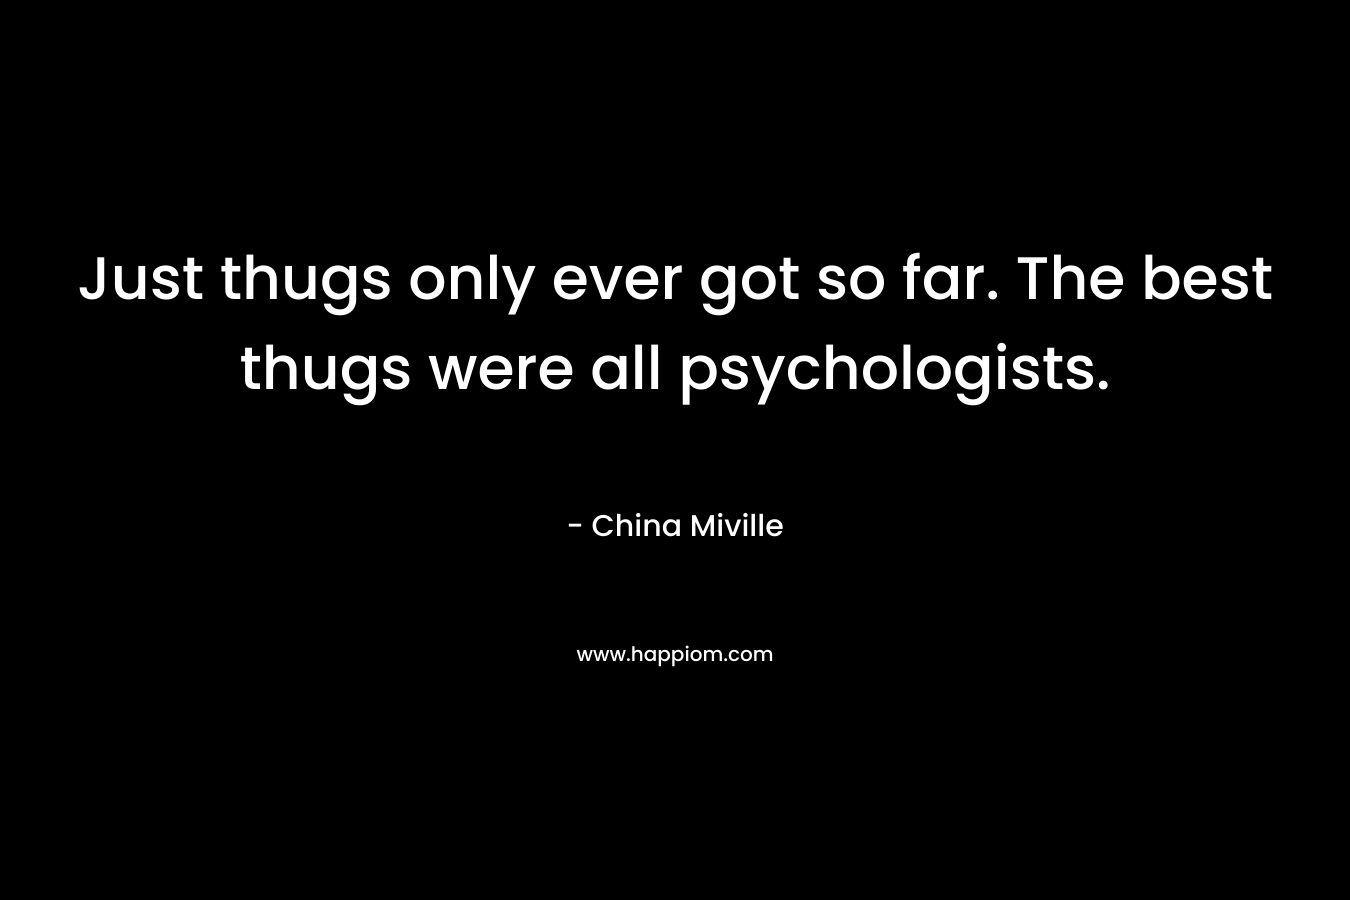 Just thugs only ever got so far. The best thugs were all psychologists. – China Miville